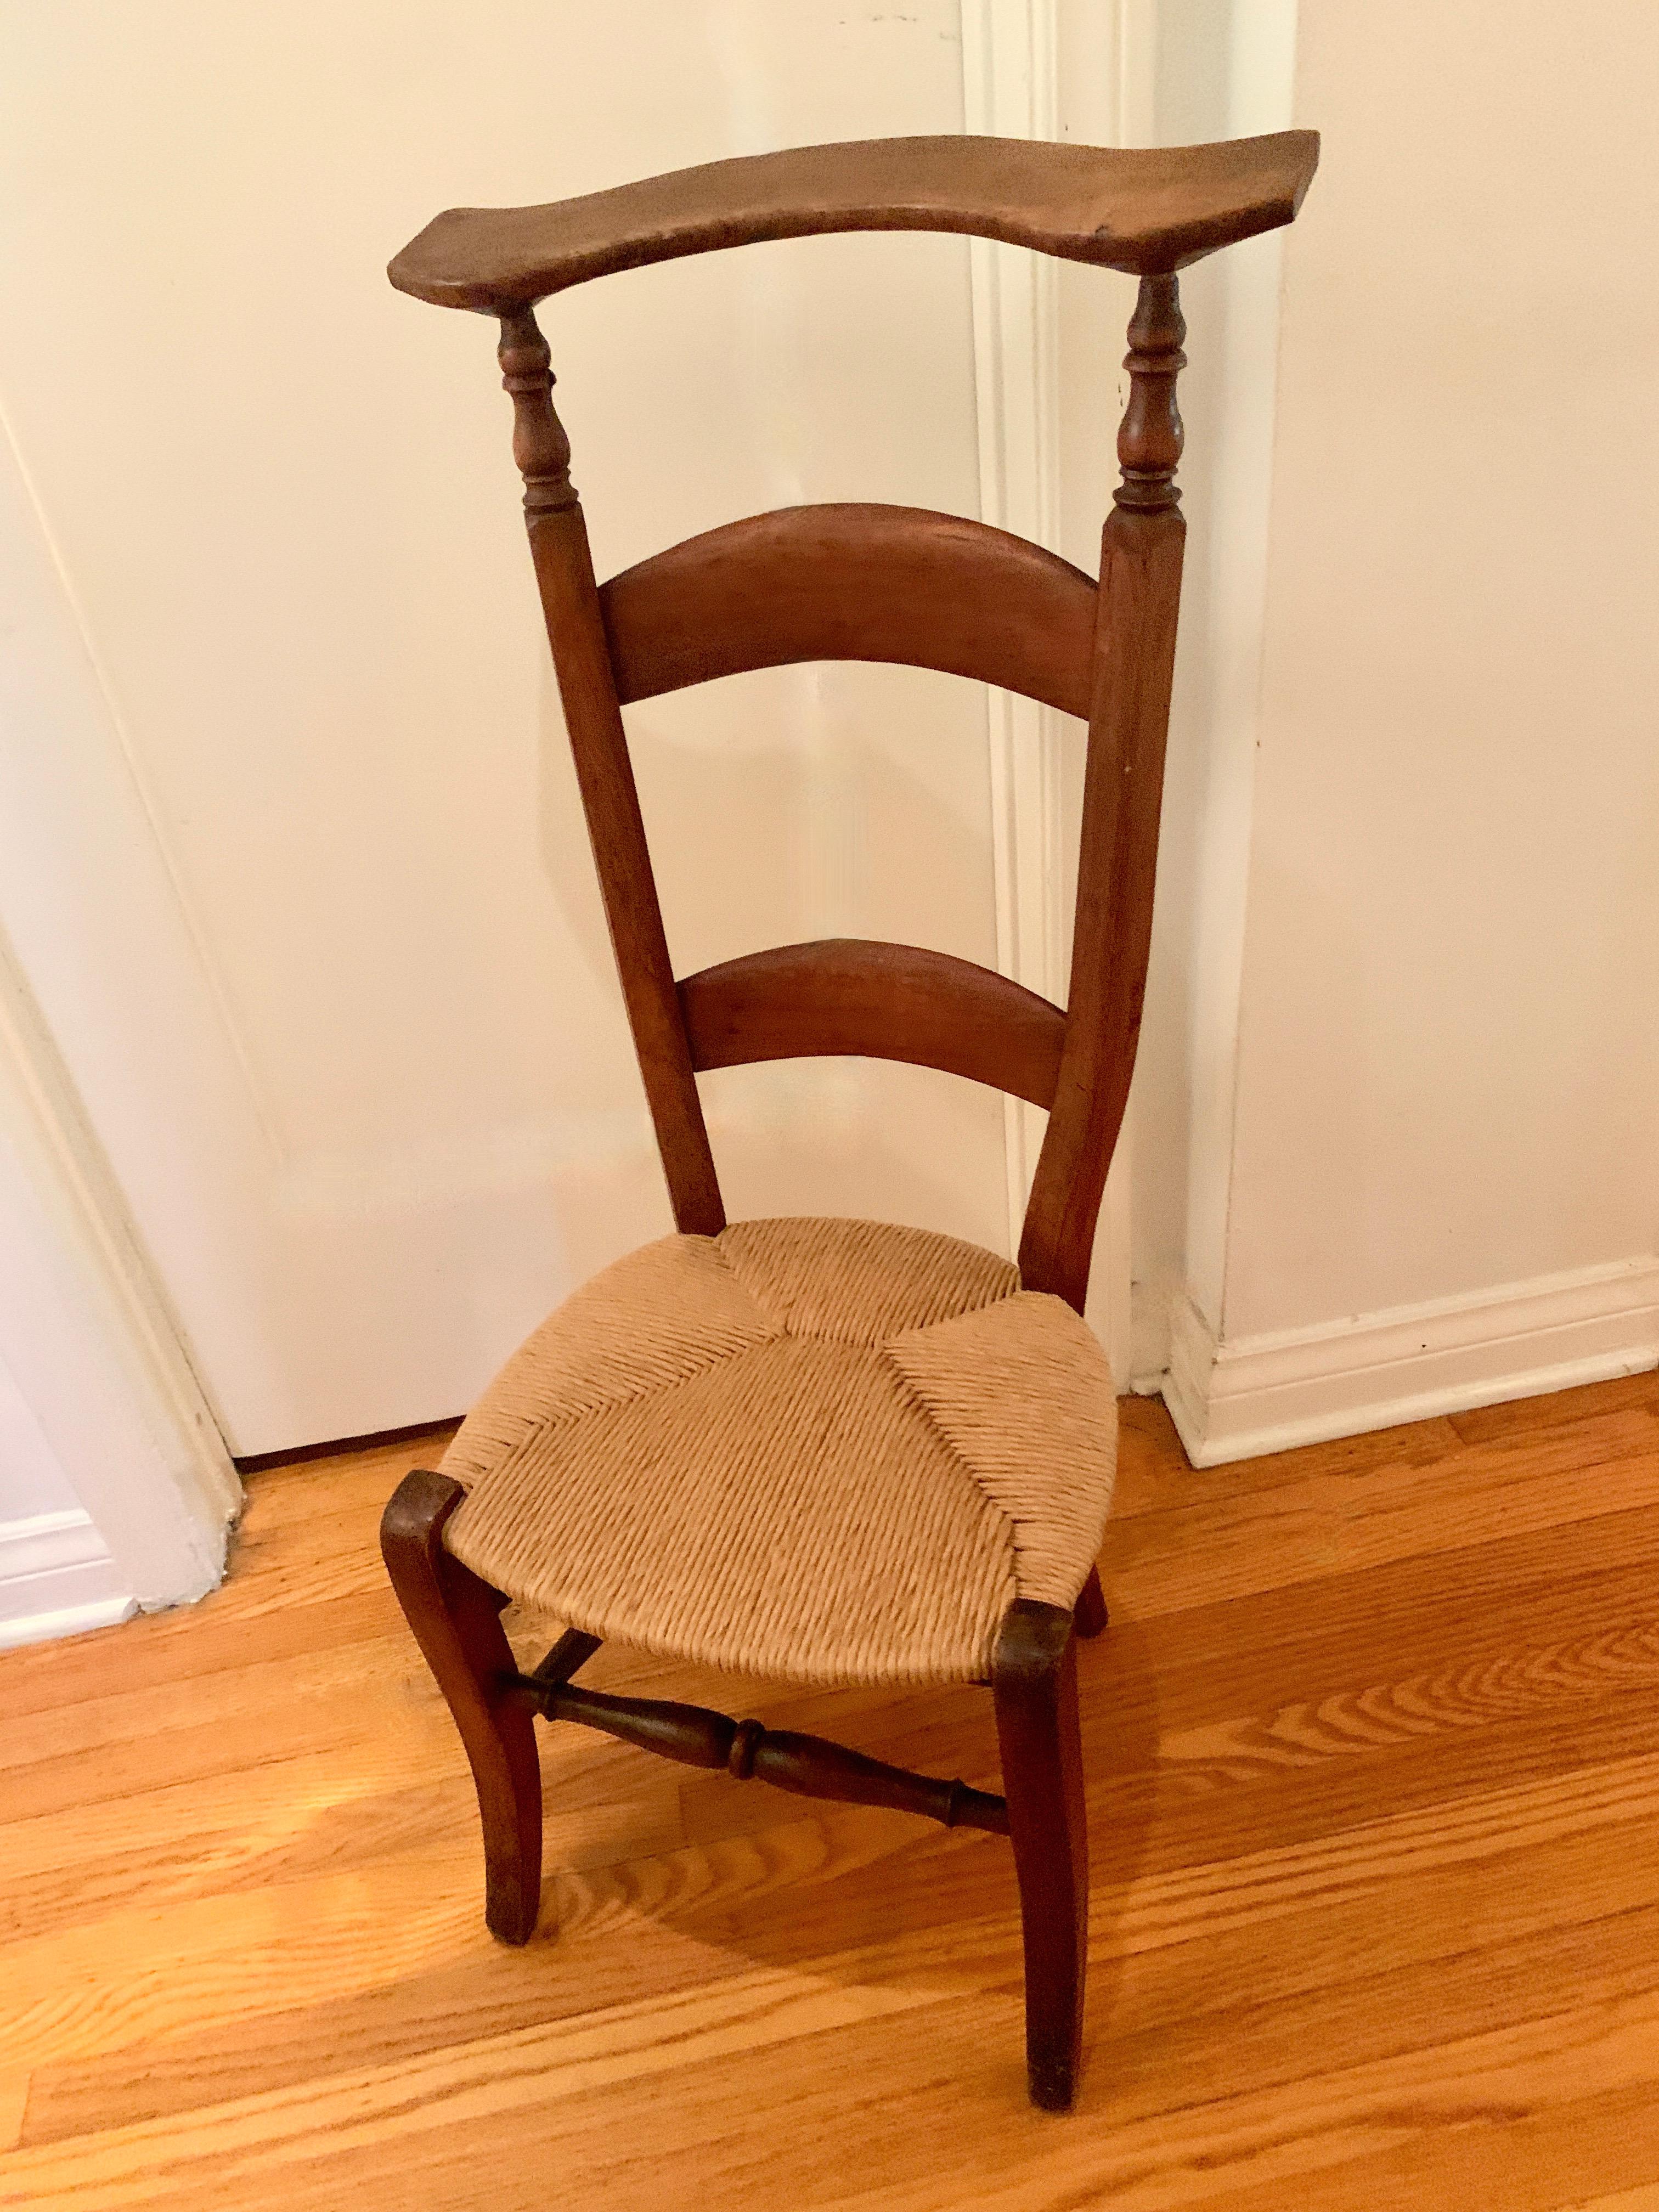 French Provincial 19th C. Prie Dieu Chair For Sale